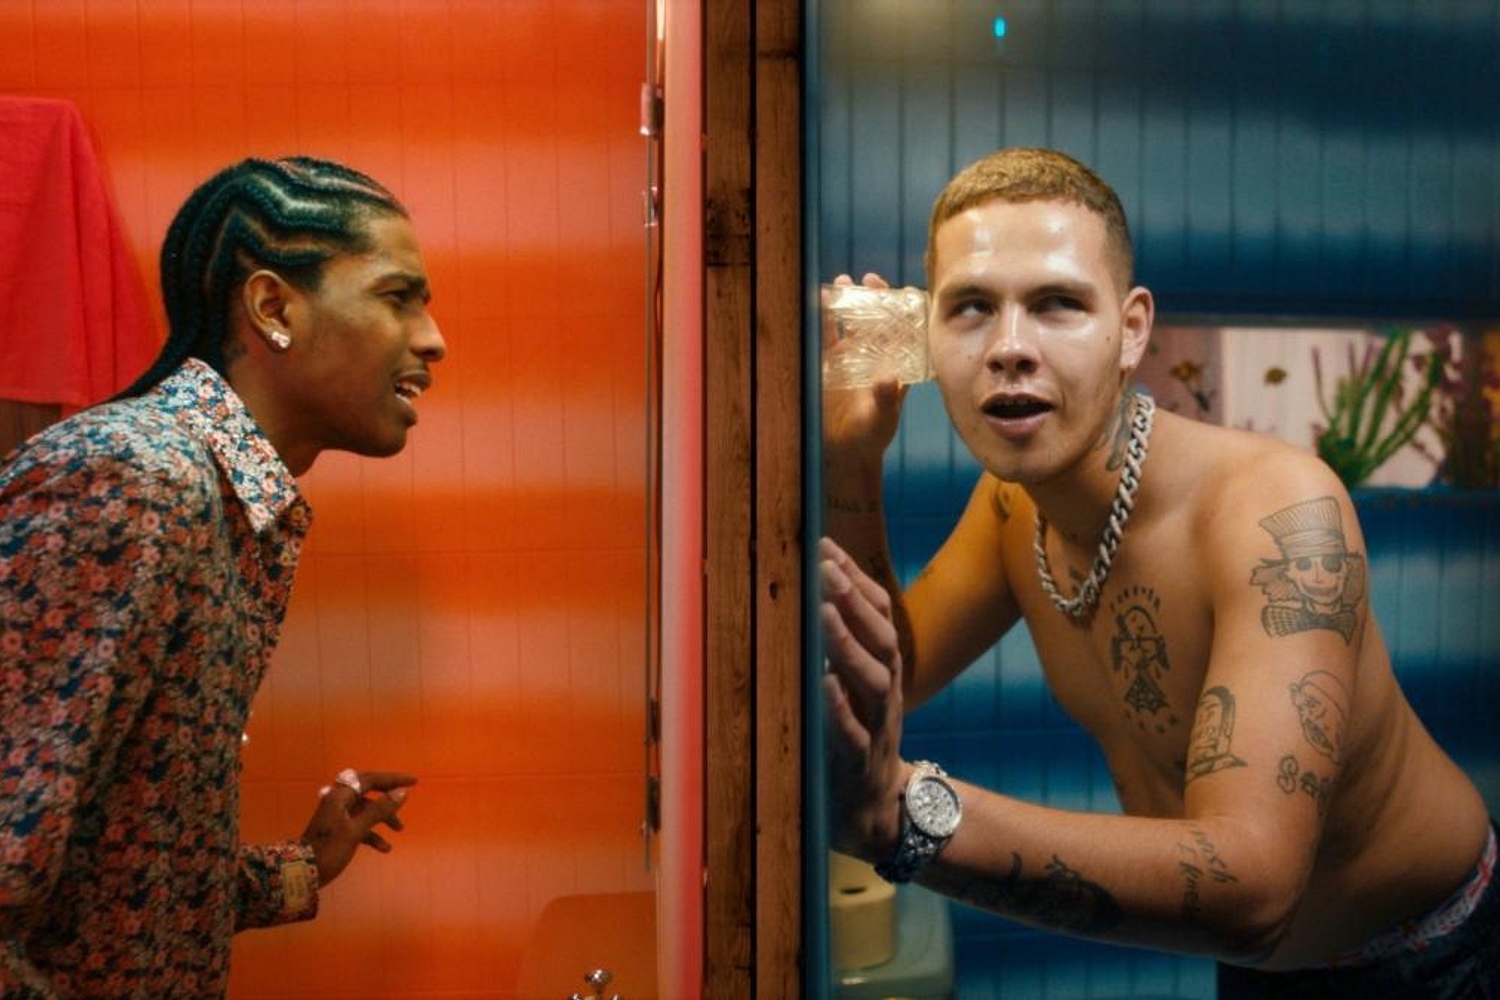 slowthai links up with A$AP Rocky for ‘MAZZA’ video